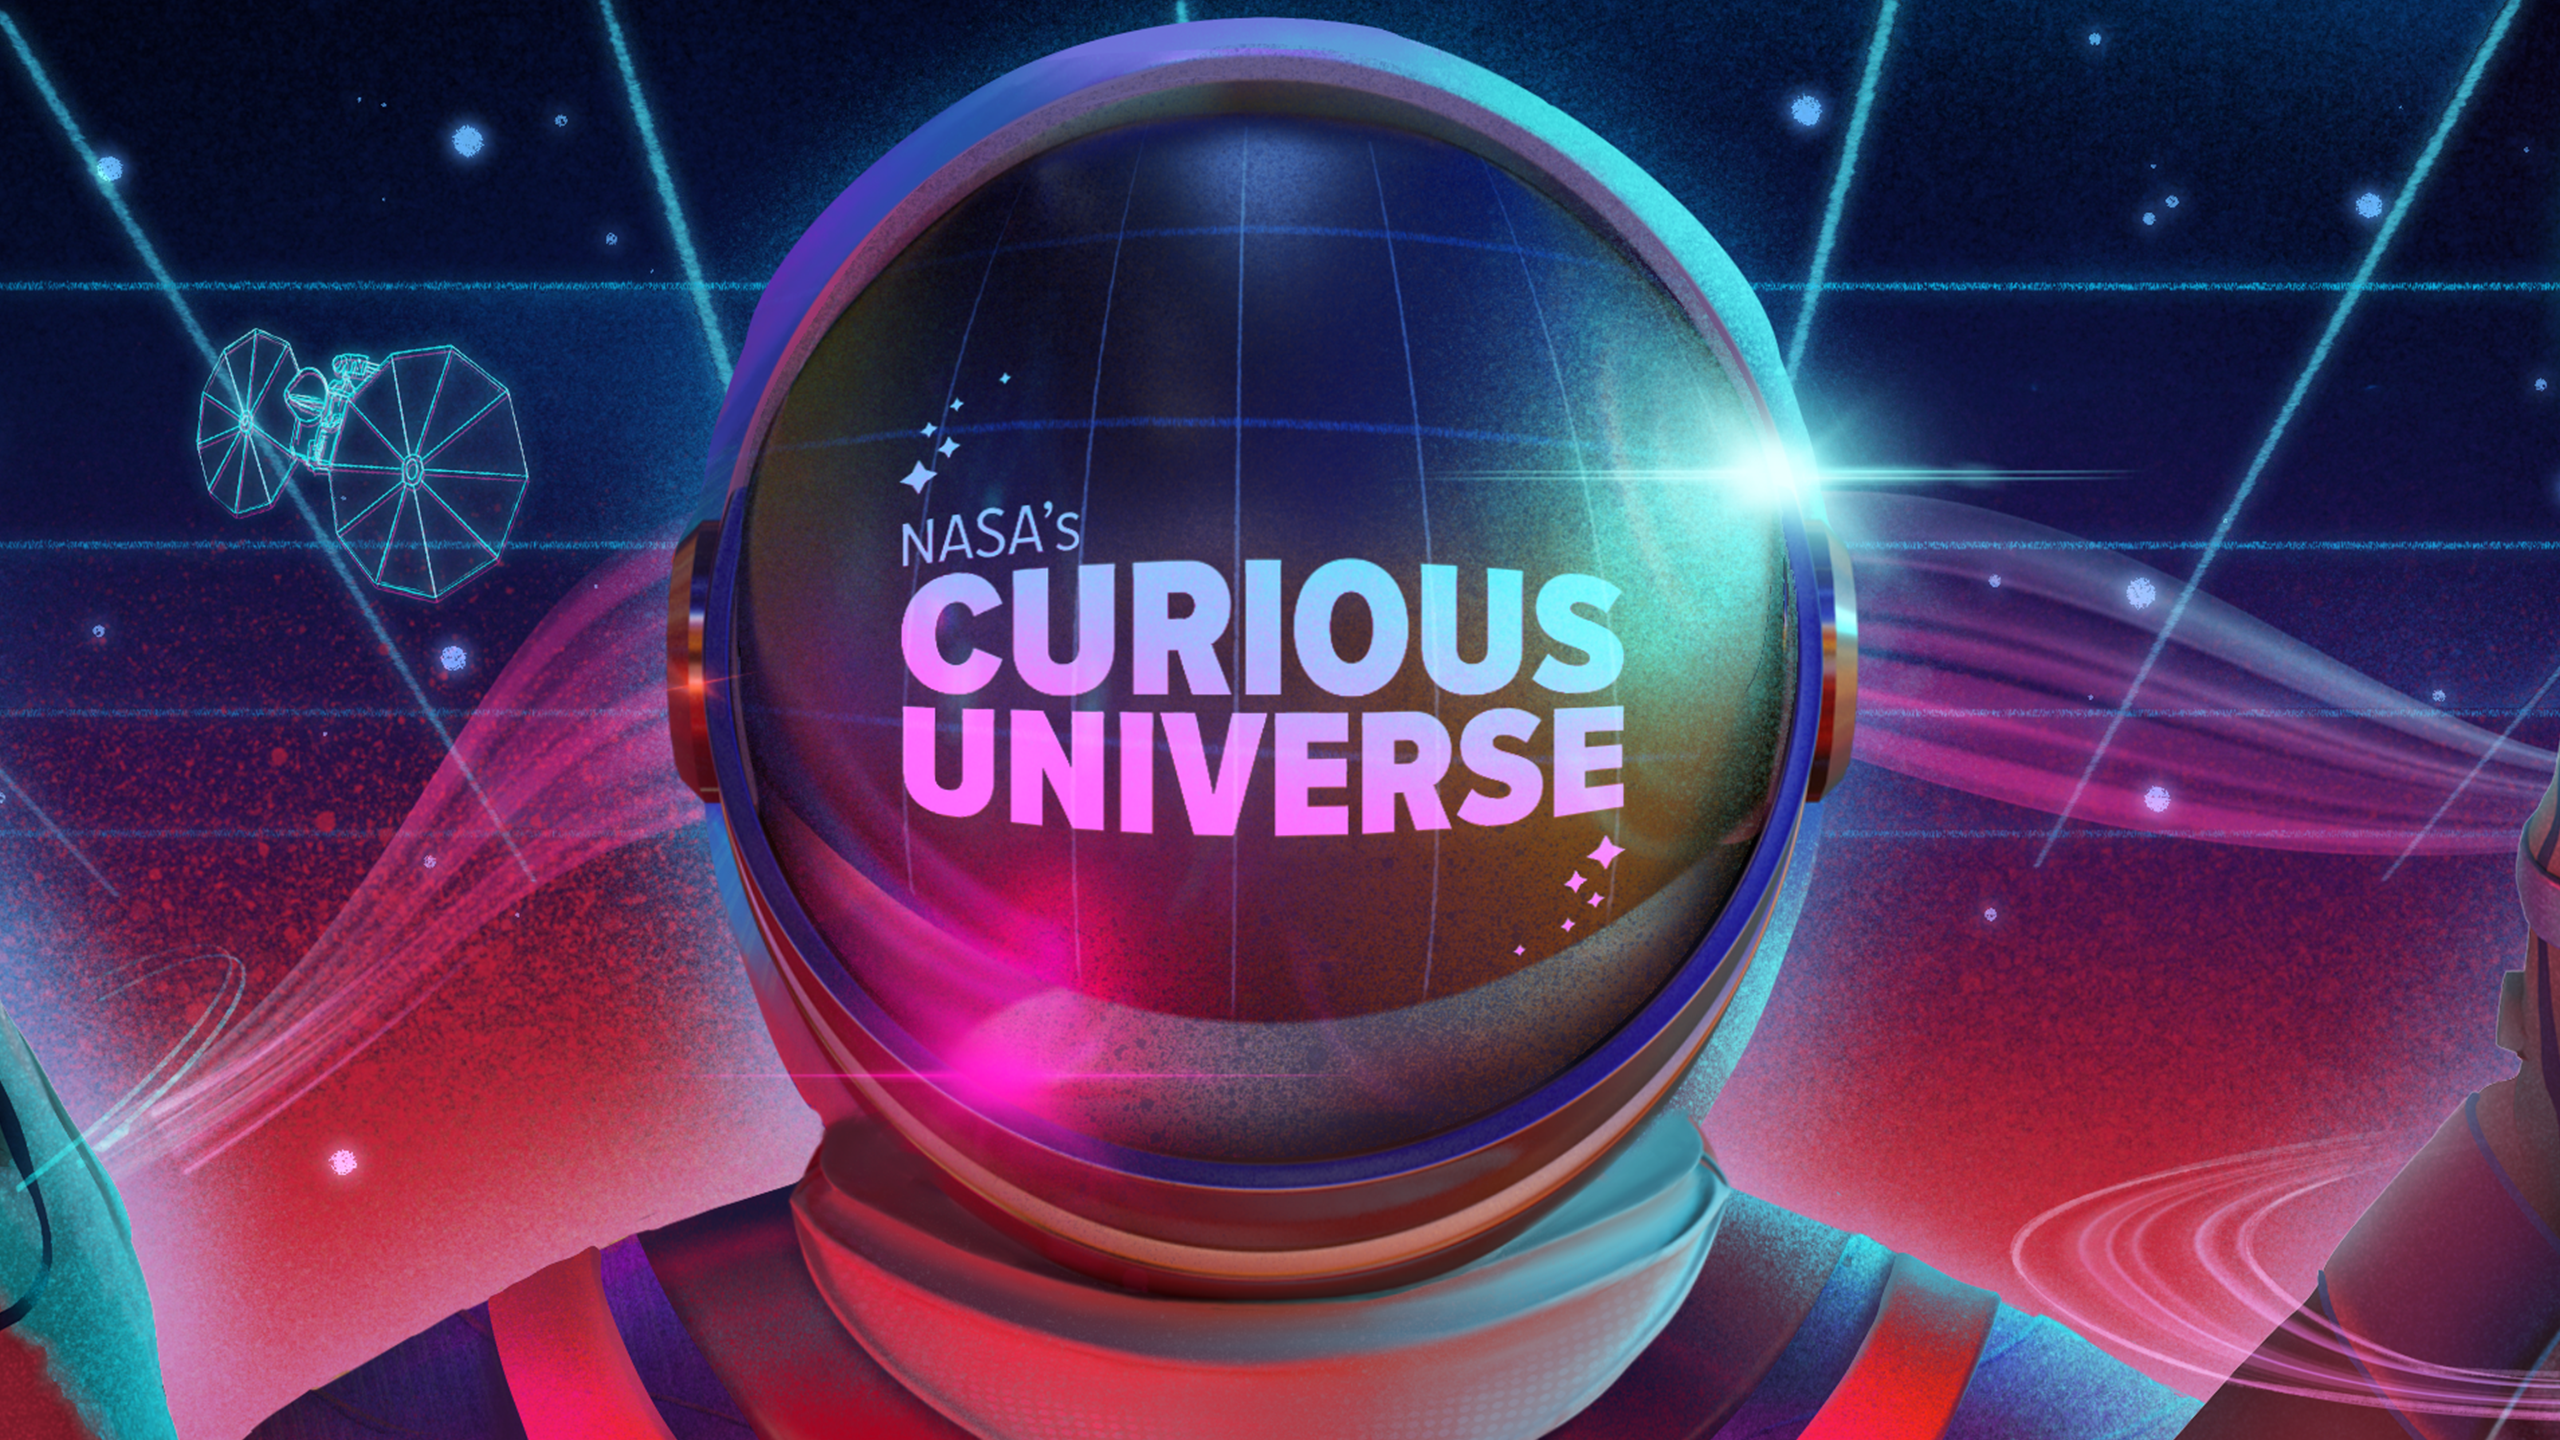 An illustration of an astronaut helmet features with NASA's Curious Universe written across it. The background shows a grid in blue hues. Pink, wavy illustrations are across the lower half of the image.